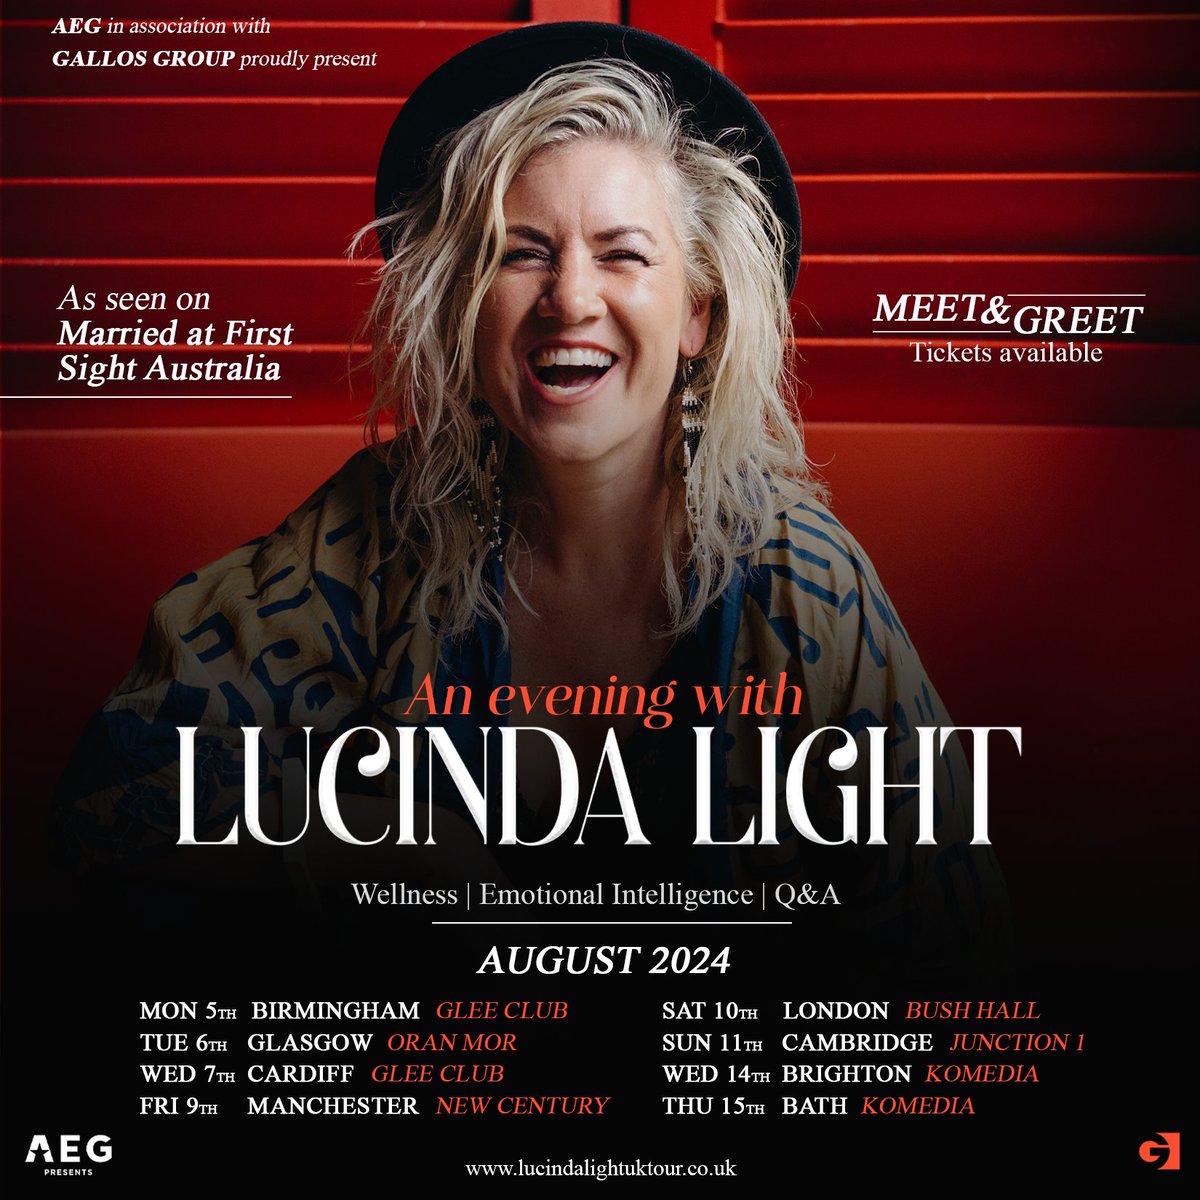 JUST ANNOUNCED! Lucinda Light | UK TOUR | August 2024 Tickets On Sale Tomorrow at 9am: aegp.uk/Lucinda24